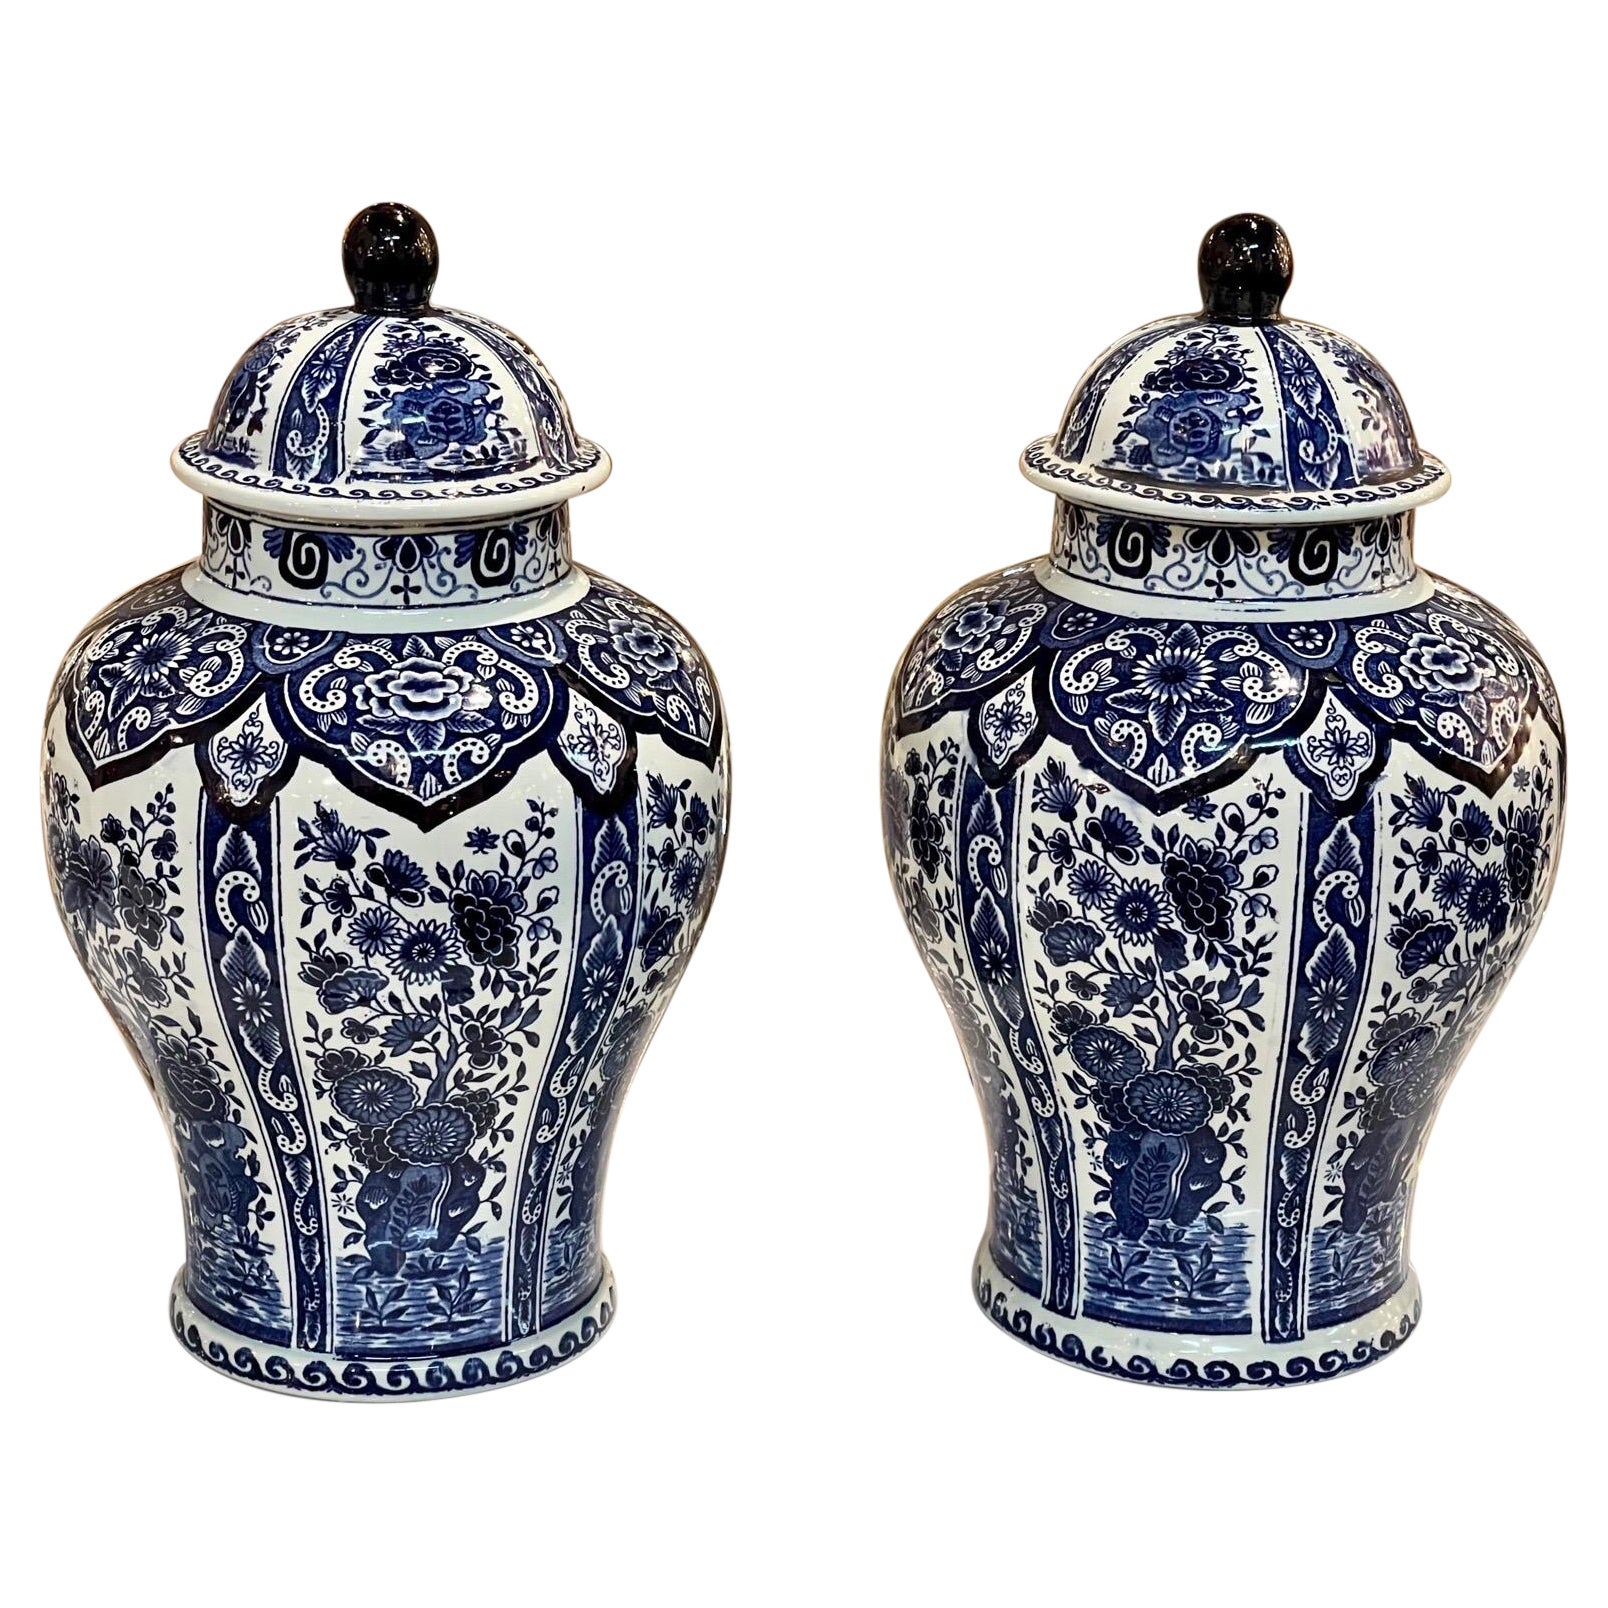 Pair of Early 20th Century Delft Blue Ginger Jars